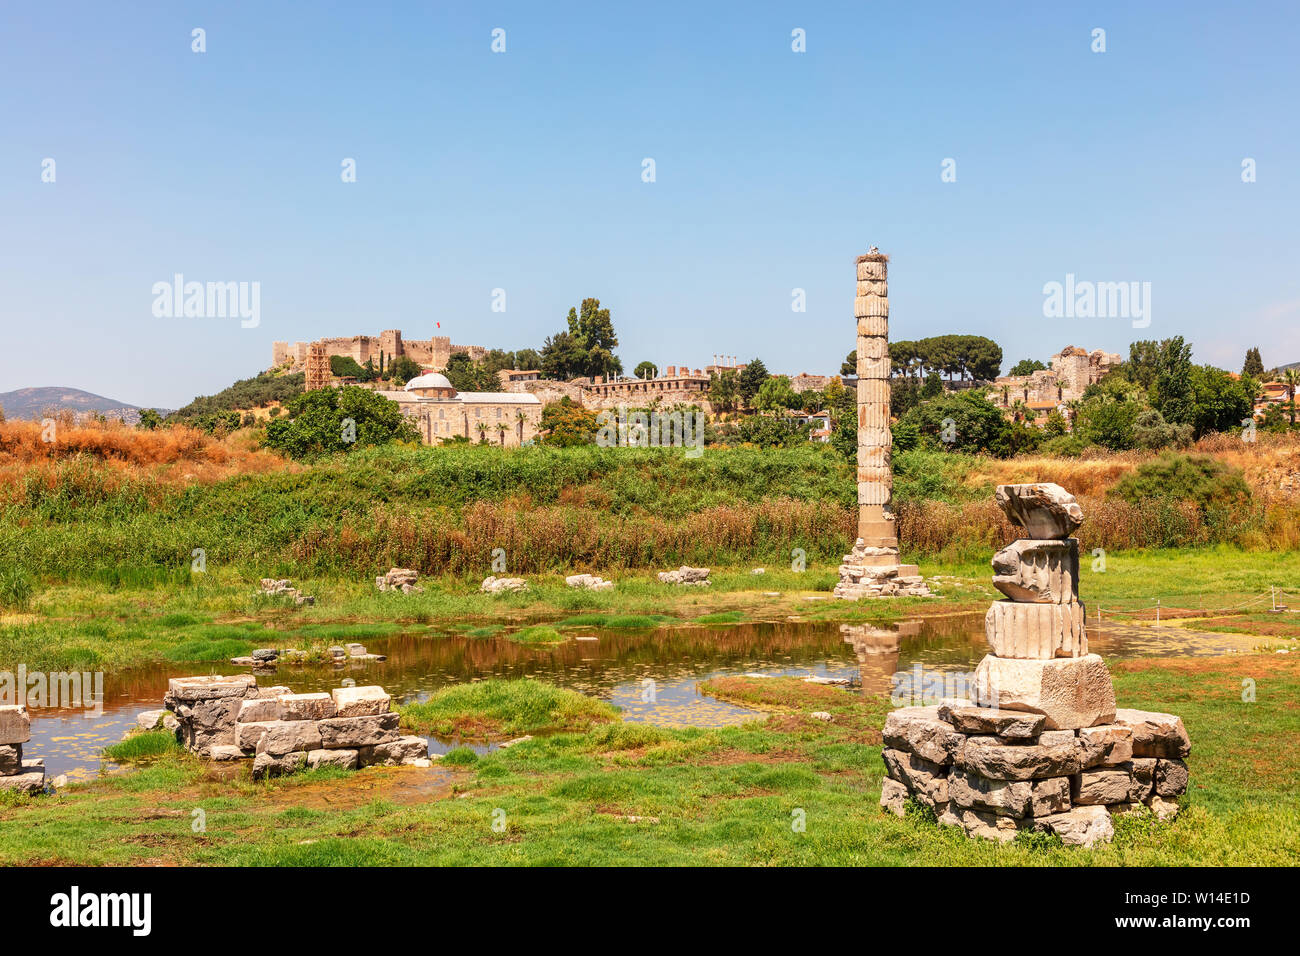 Archaeological site of the Temple of Artemis is known as one of the Seven Wonders of the ancient world in Selcuk area of Turkey. Stock Photo